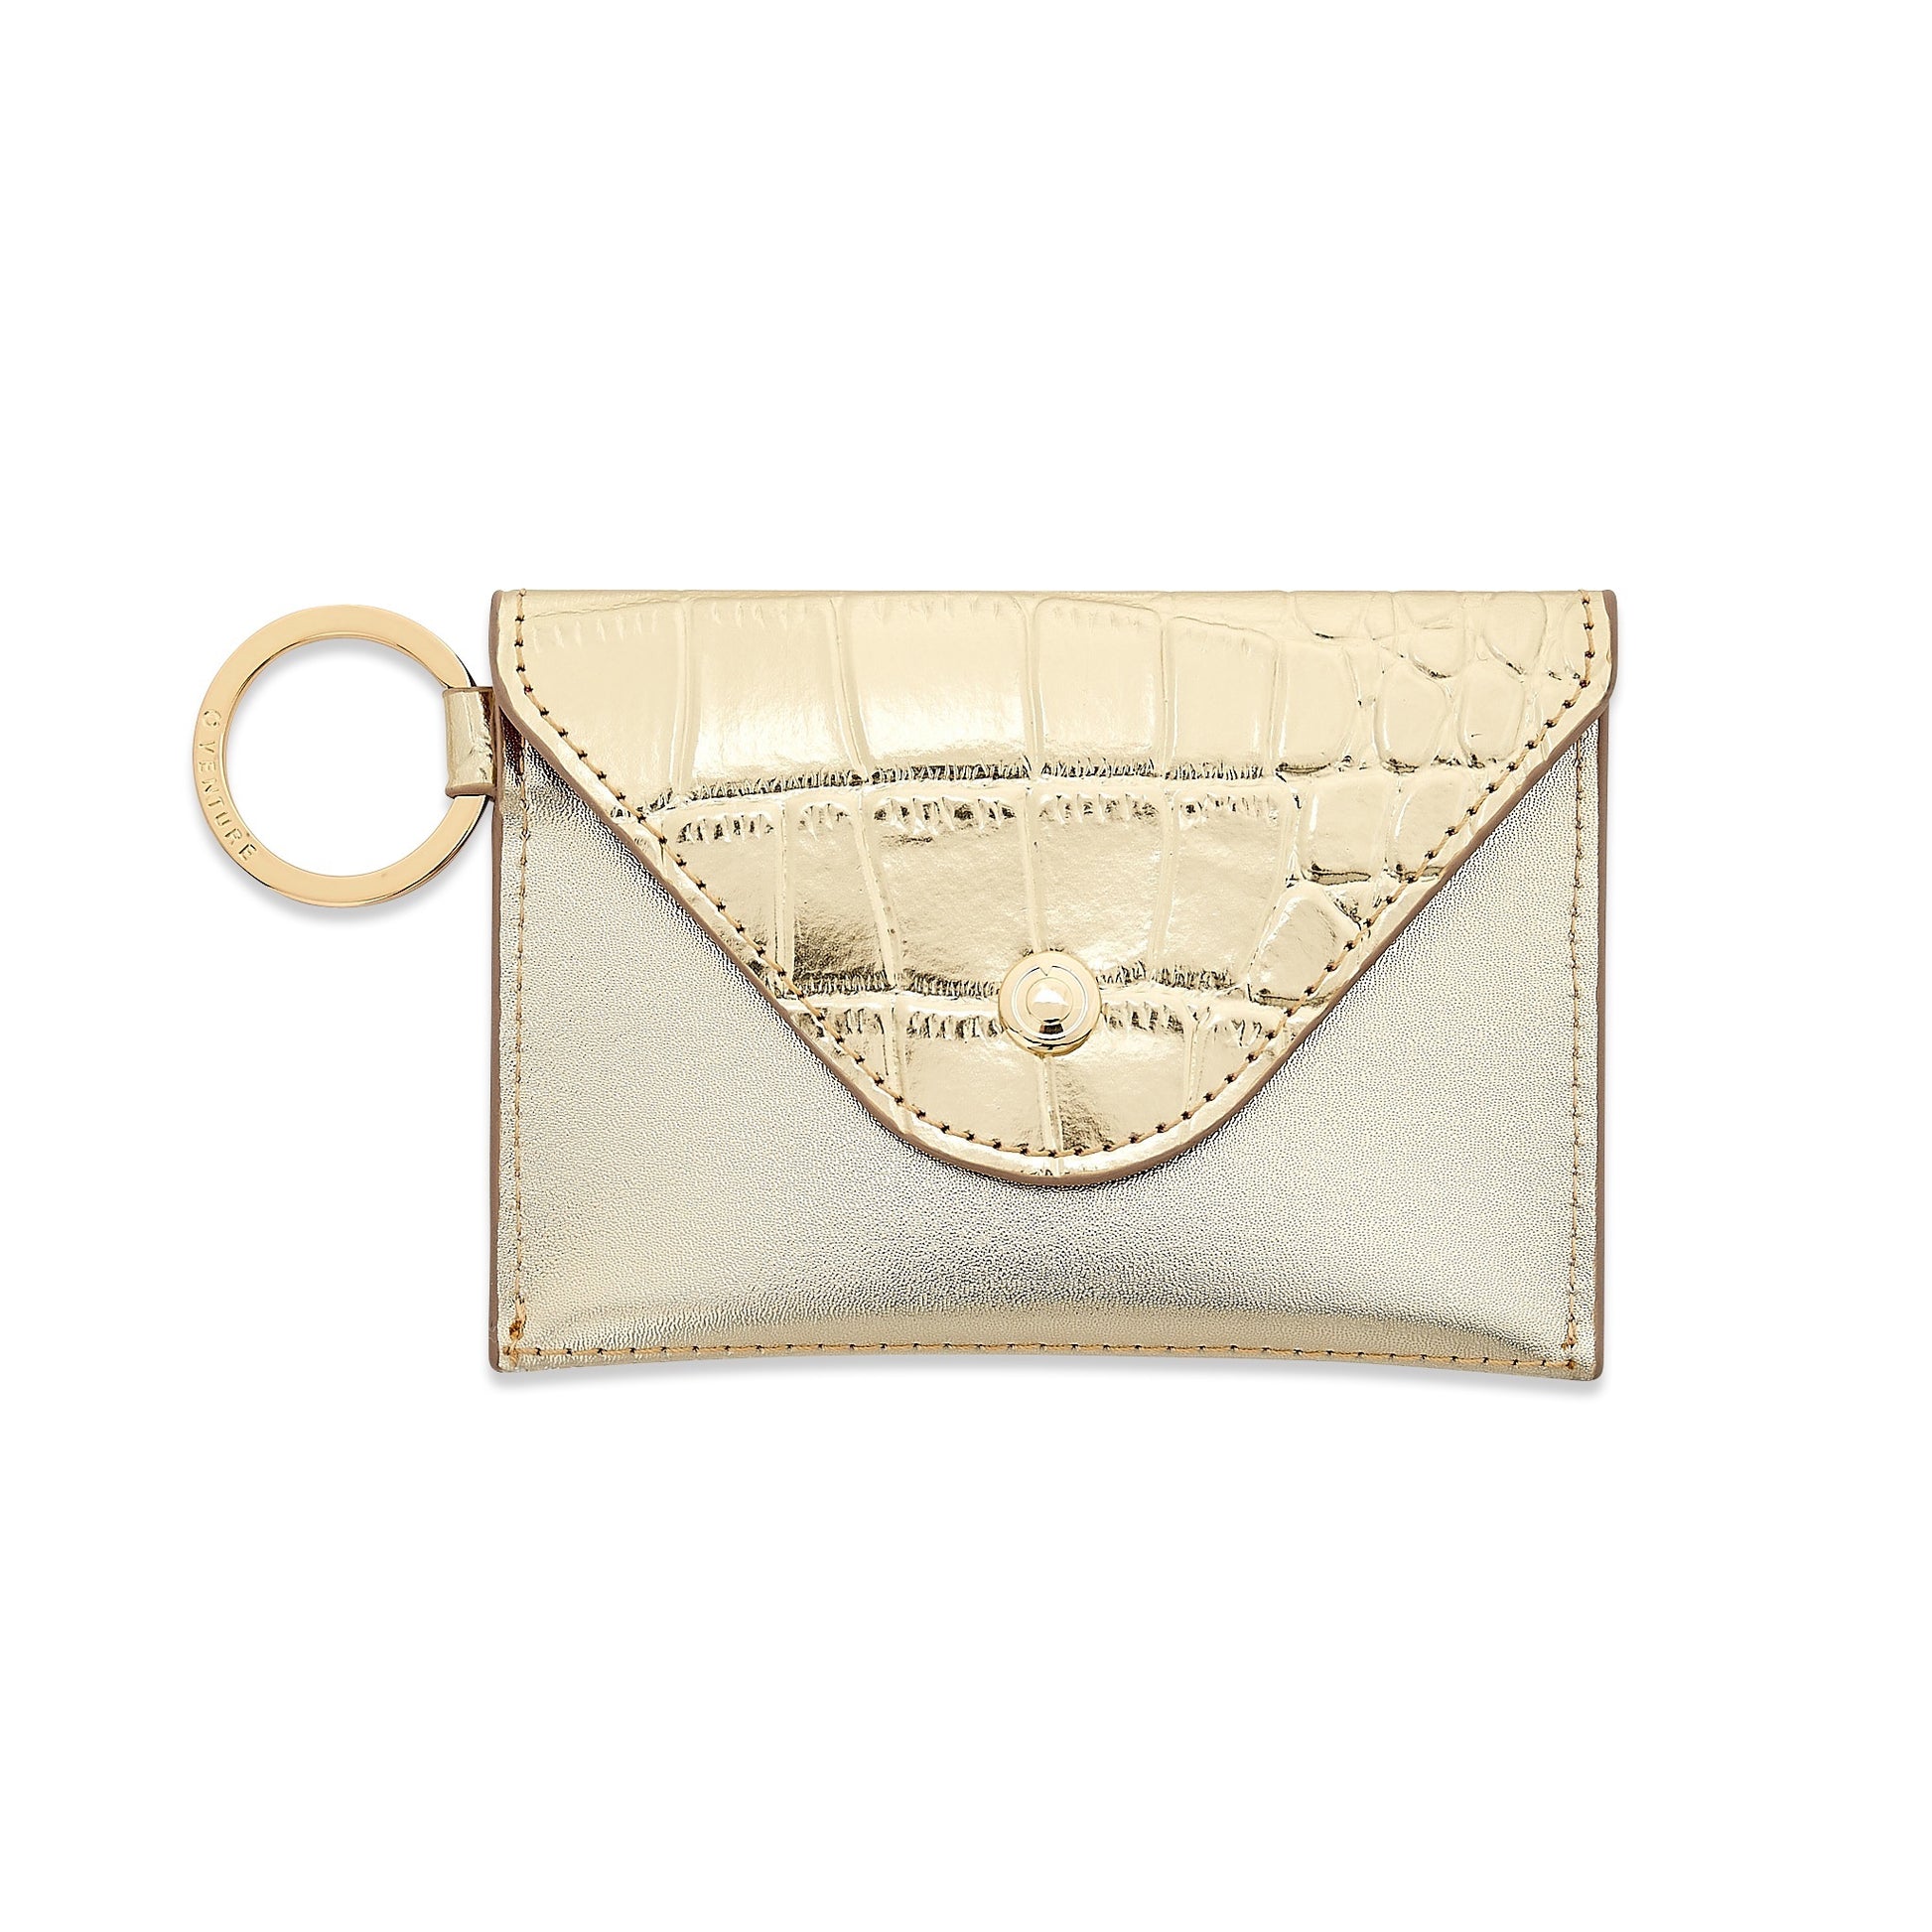 Oventure mini envelope wallet in solid gold rush croc embossed leather